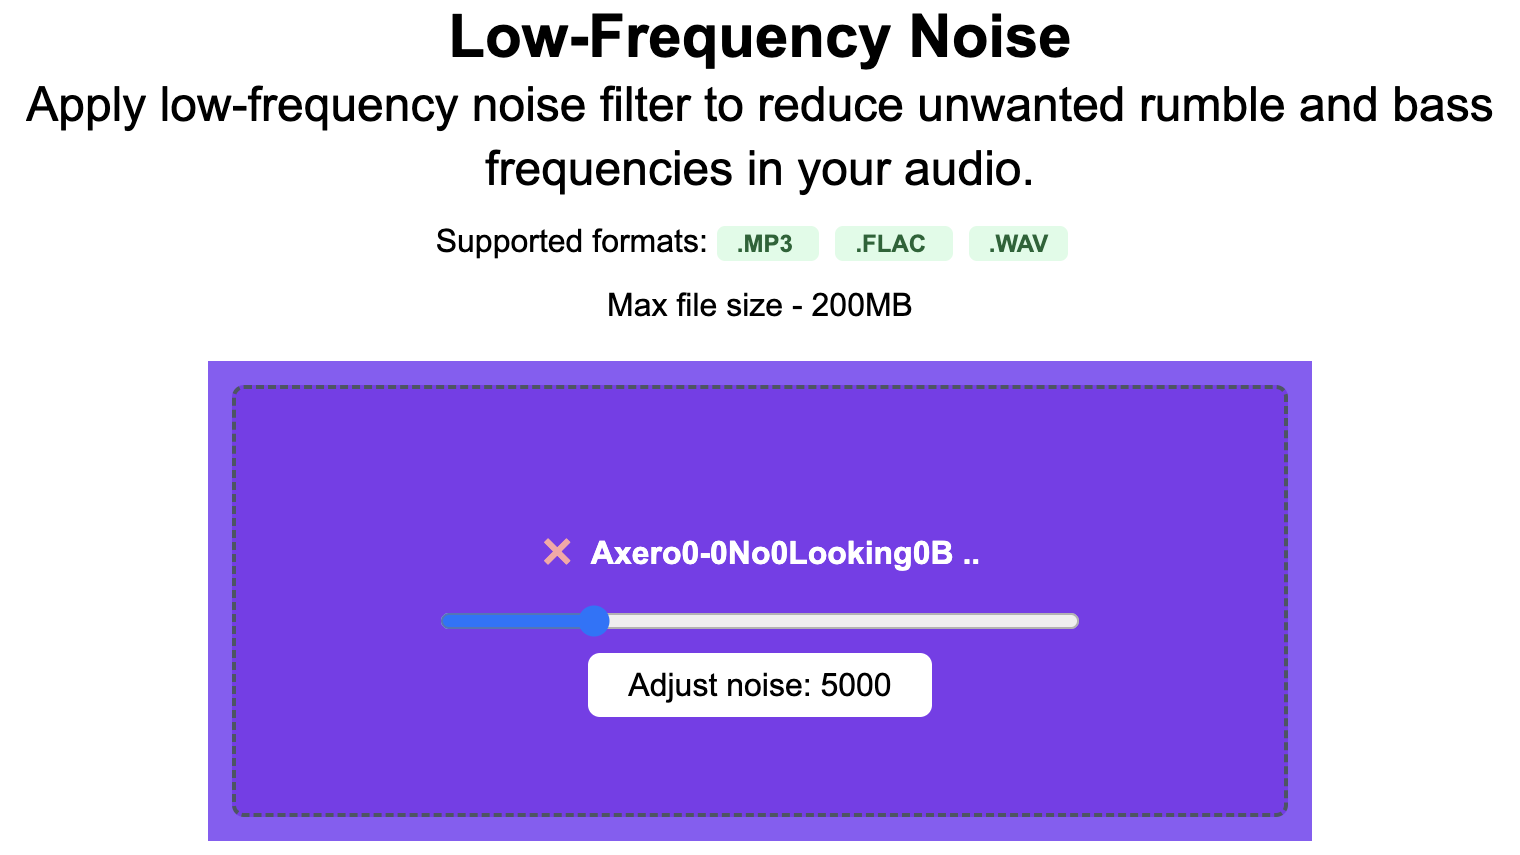 RouteNote Convert – Free low-frequency noise filter online